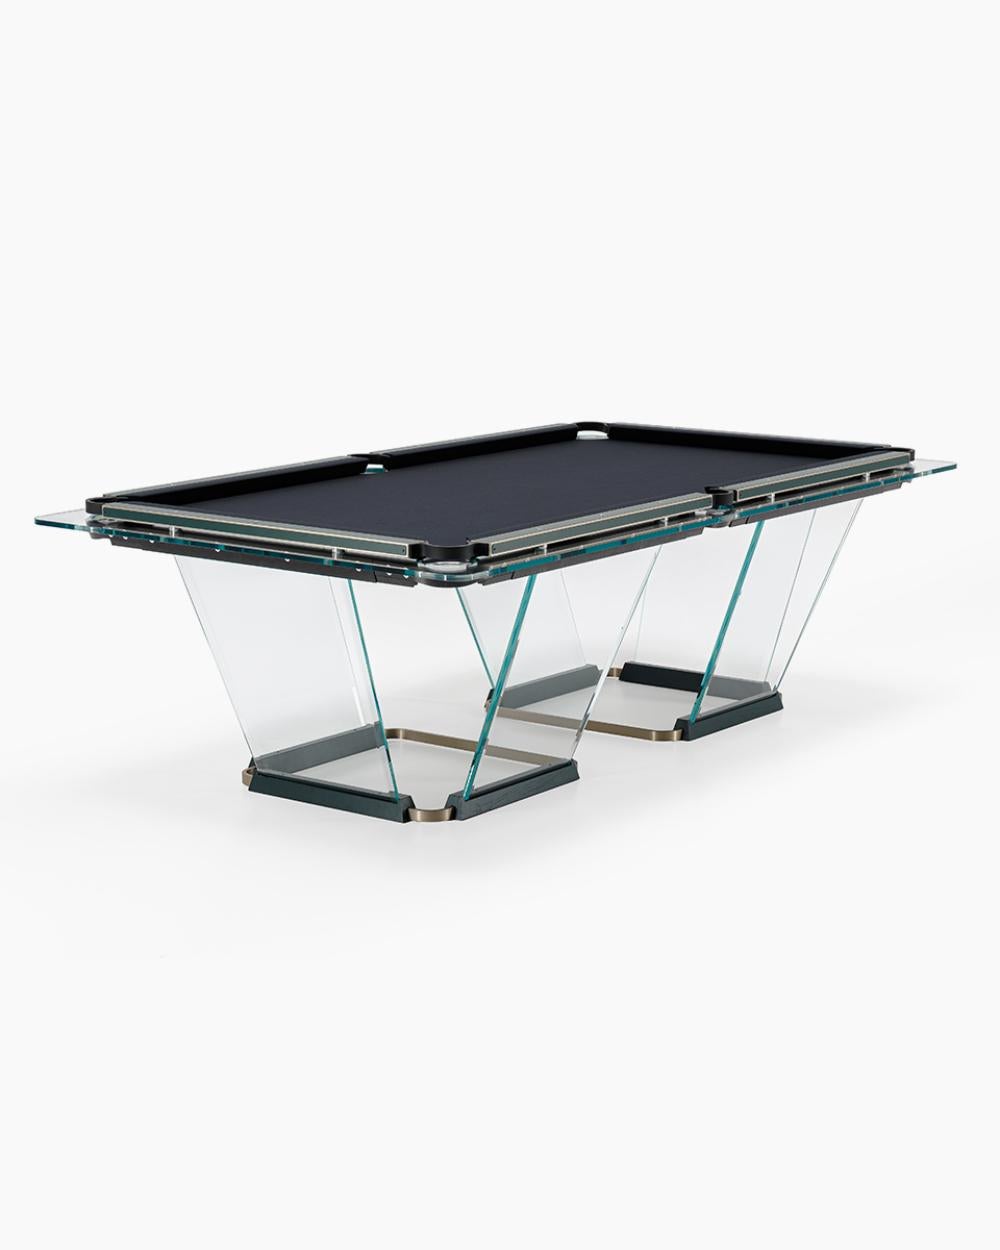 T.1.3  is a billiard-pool table made entirely of glass, where the playing surface is specially treated reproducing the friction of traditional cloth.
The feet are sheets of glass bevelled on both sides that self-stabilize, the support is made of